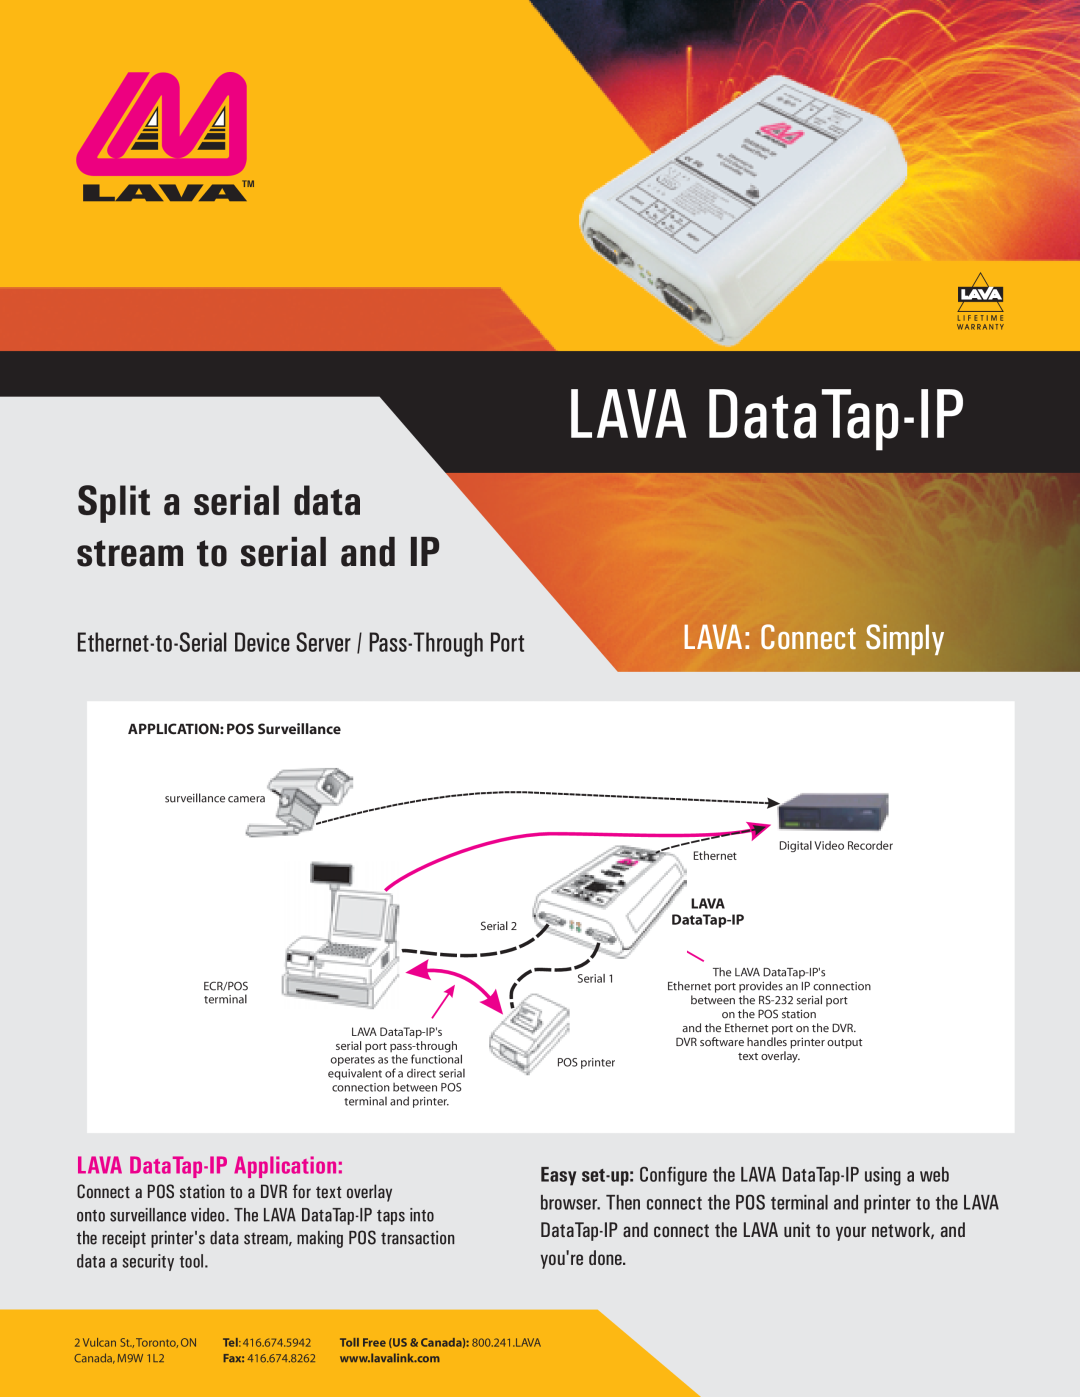 Lava Computer DATATAP-IP manual LAVA DataTap-IP, LAVA Connect Simply, Split a serial data stream to serial and IP, Lava 